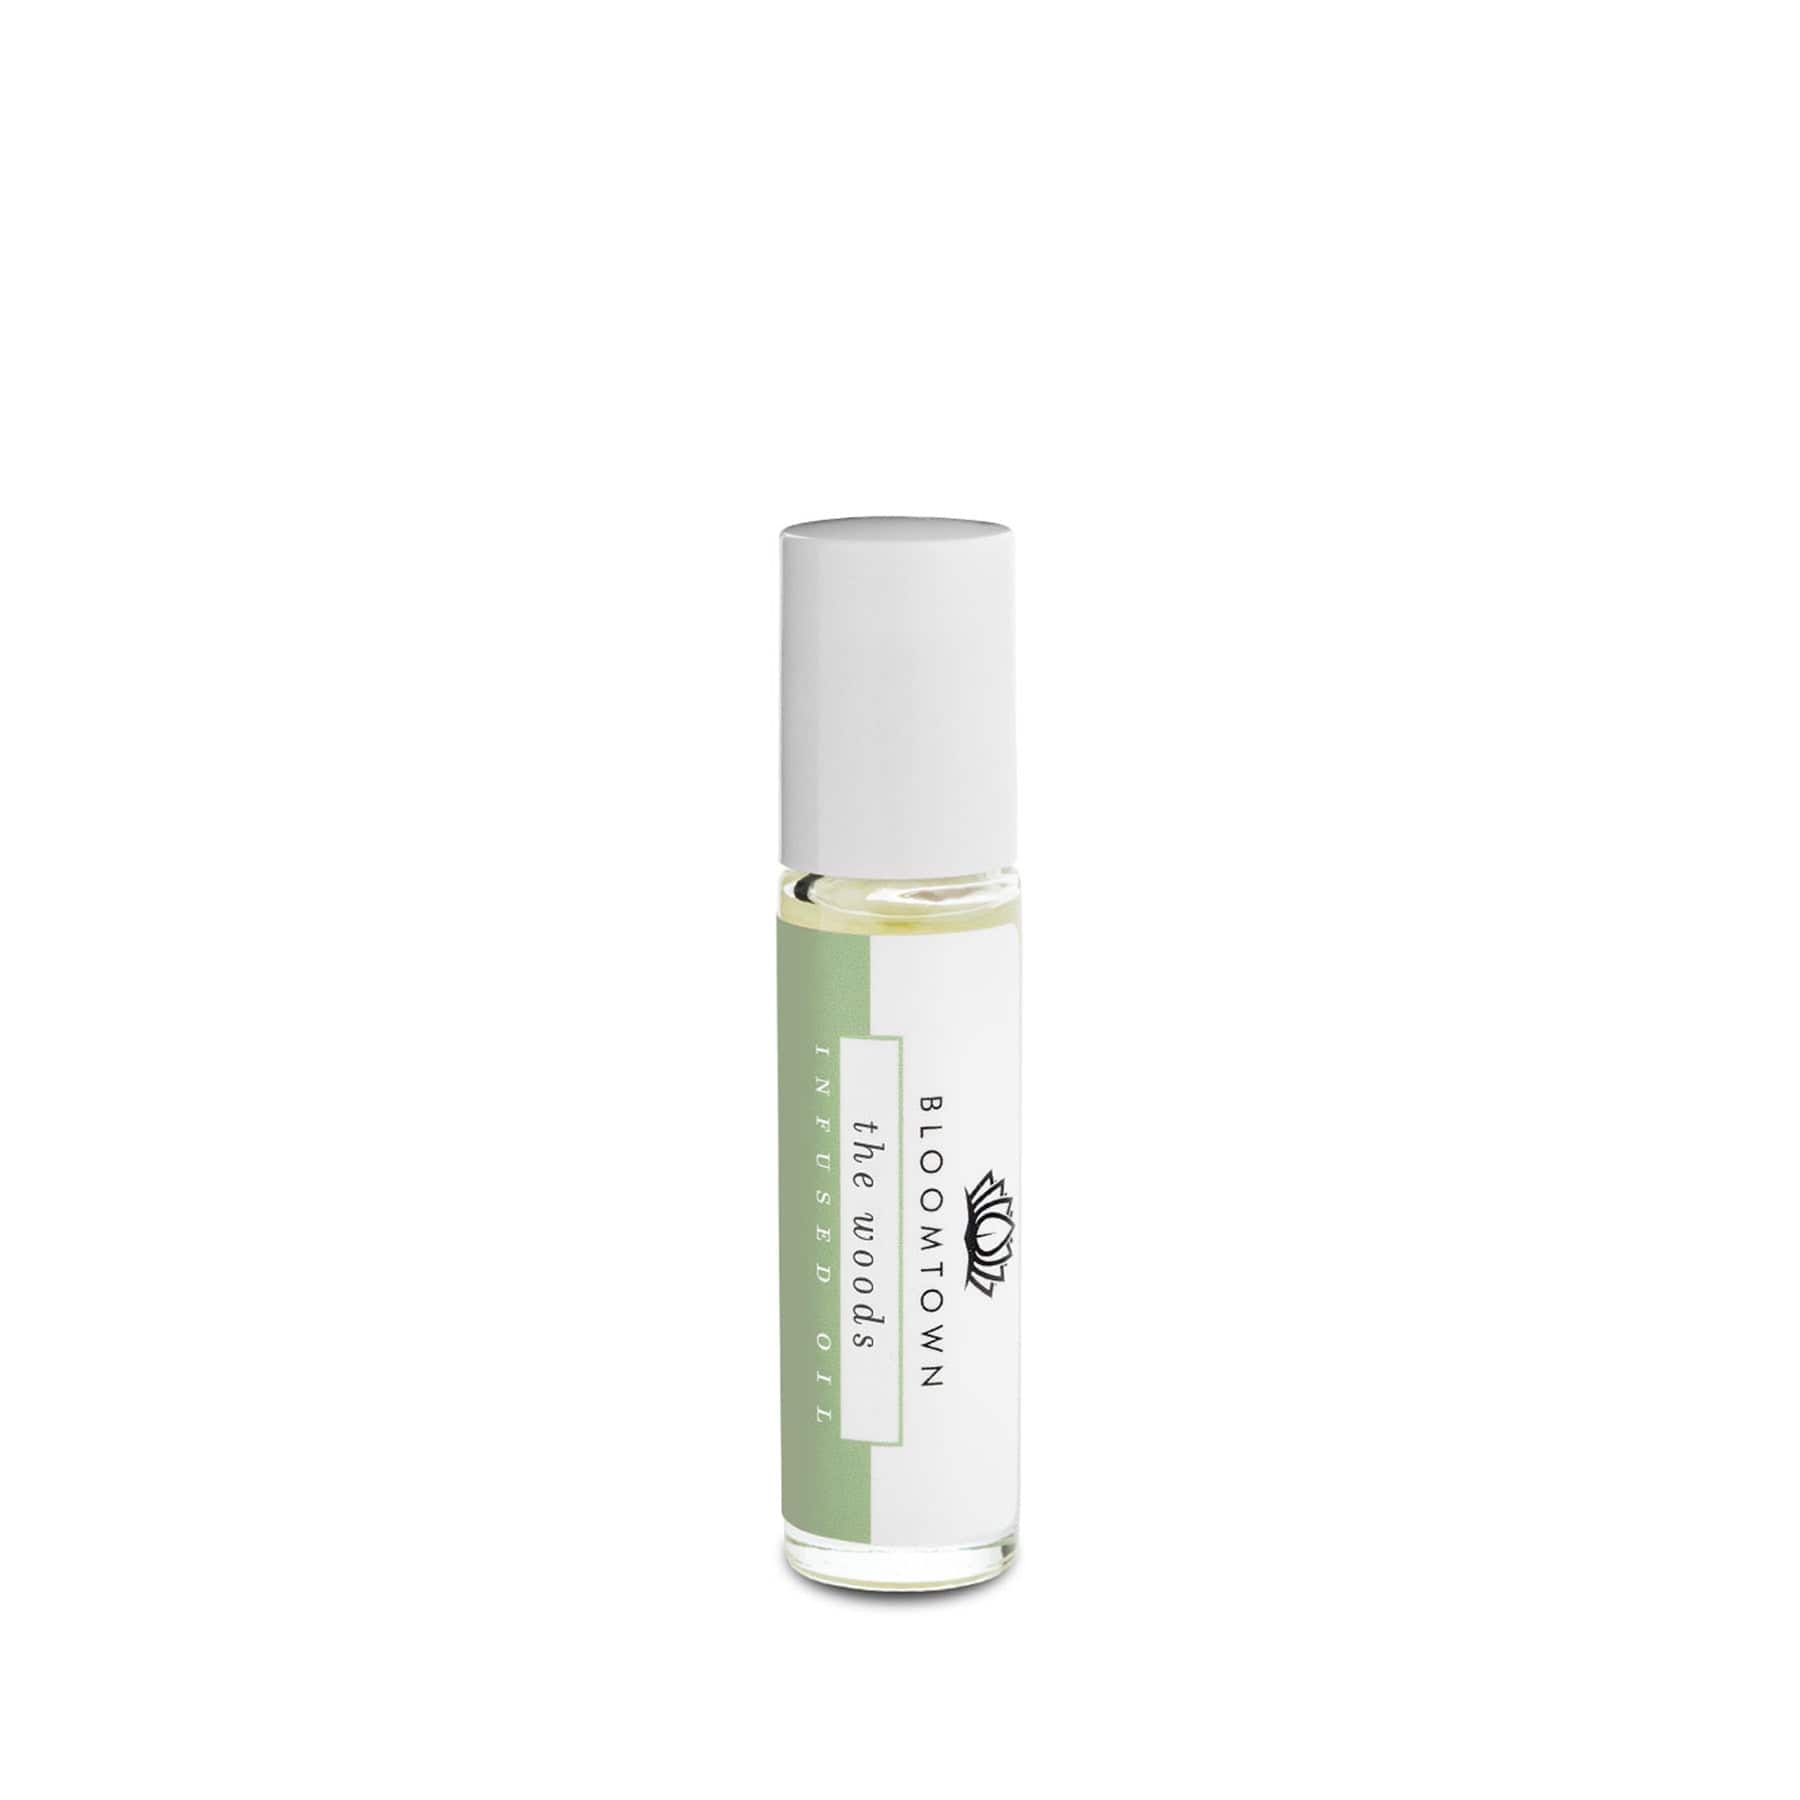 Rollerball perfume oil bottle by Bloomtown with white cap and green label on a white background.